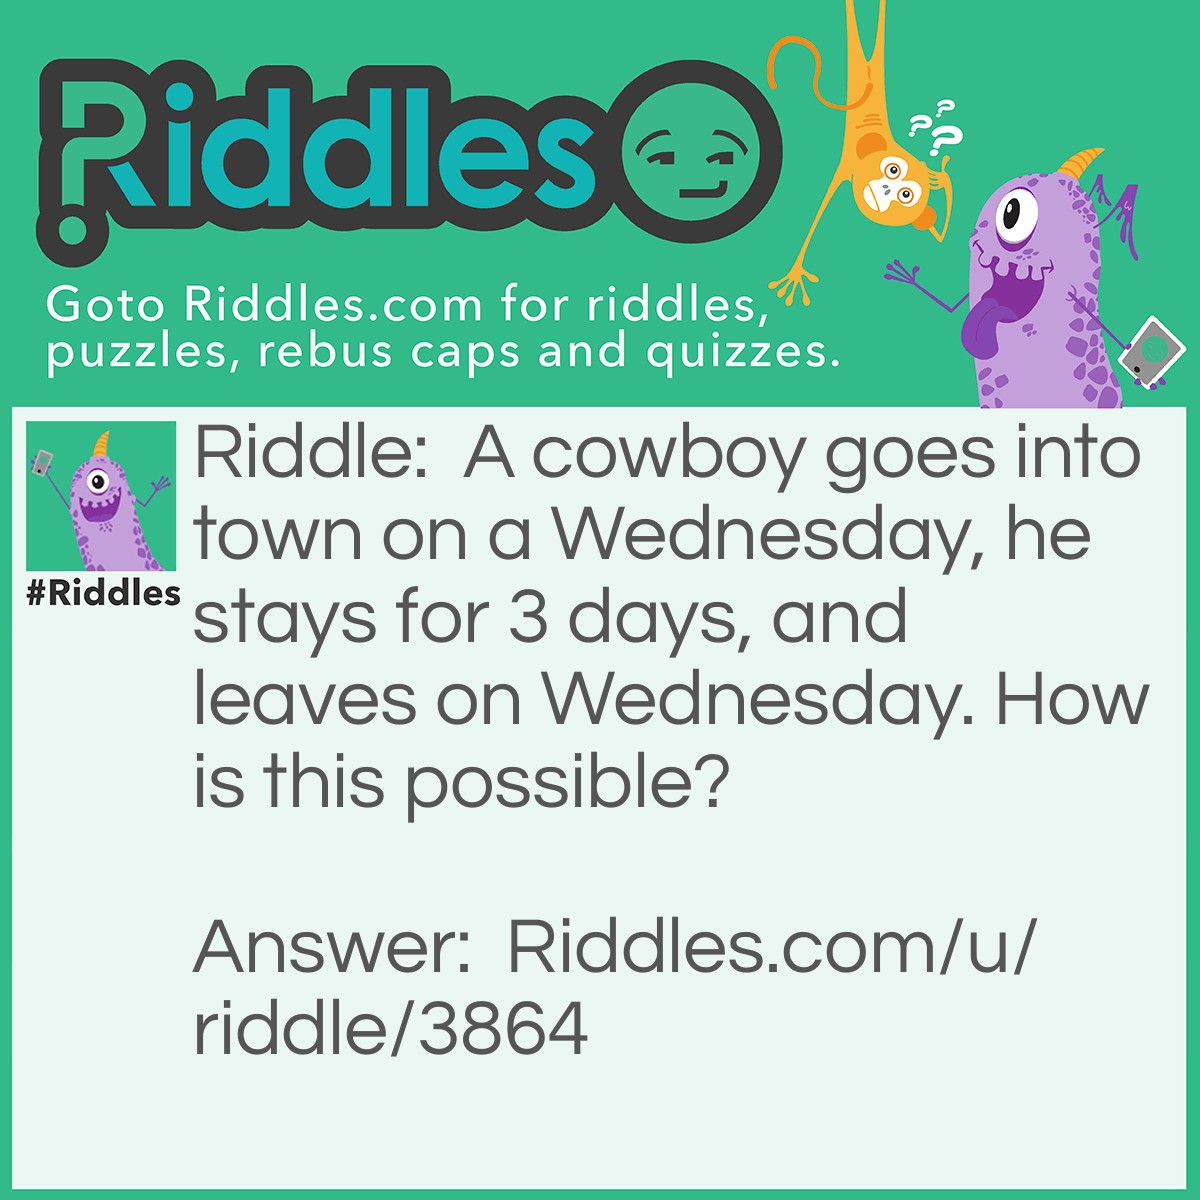 Riddle: A cowboy goes into town on a Wednesday, he stays for 3 days, and leaves on Wednesday. How is this possible? Answer: His horse's name is Wednesday!